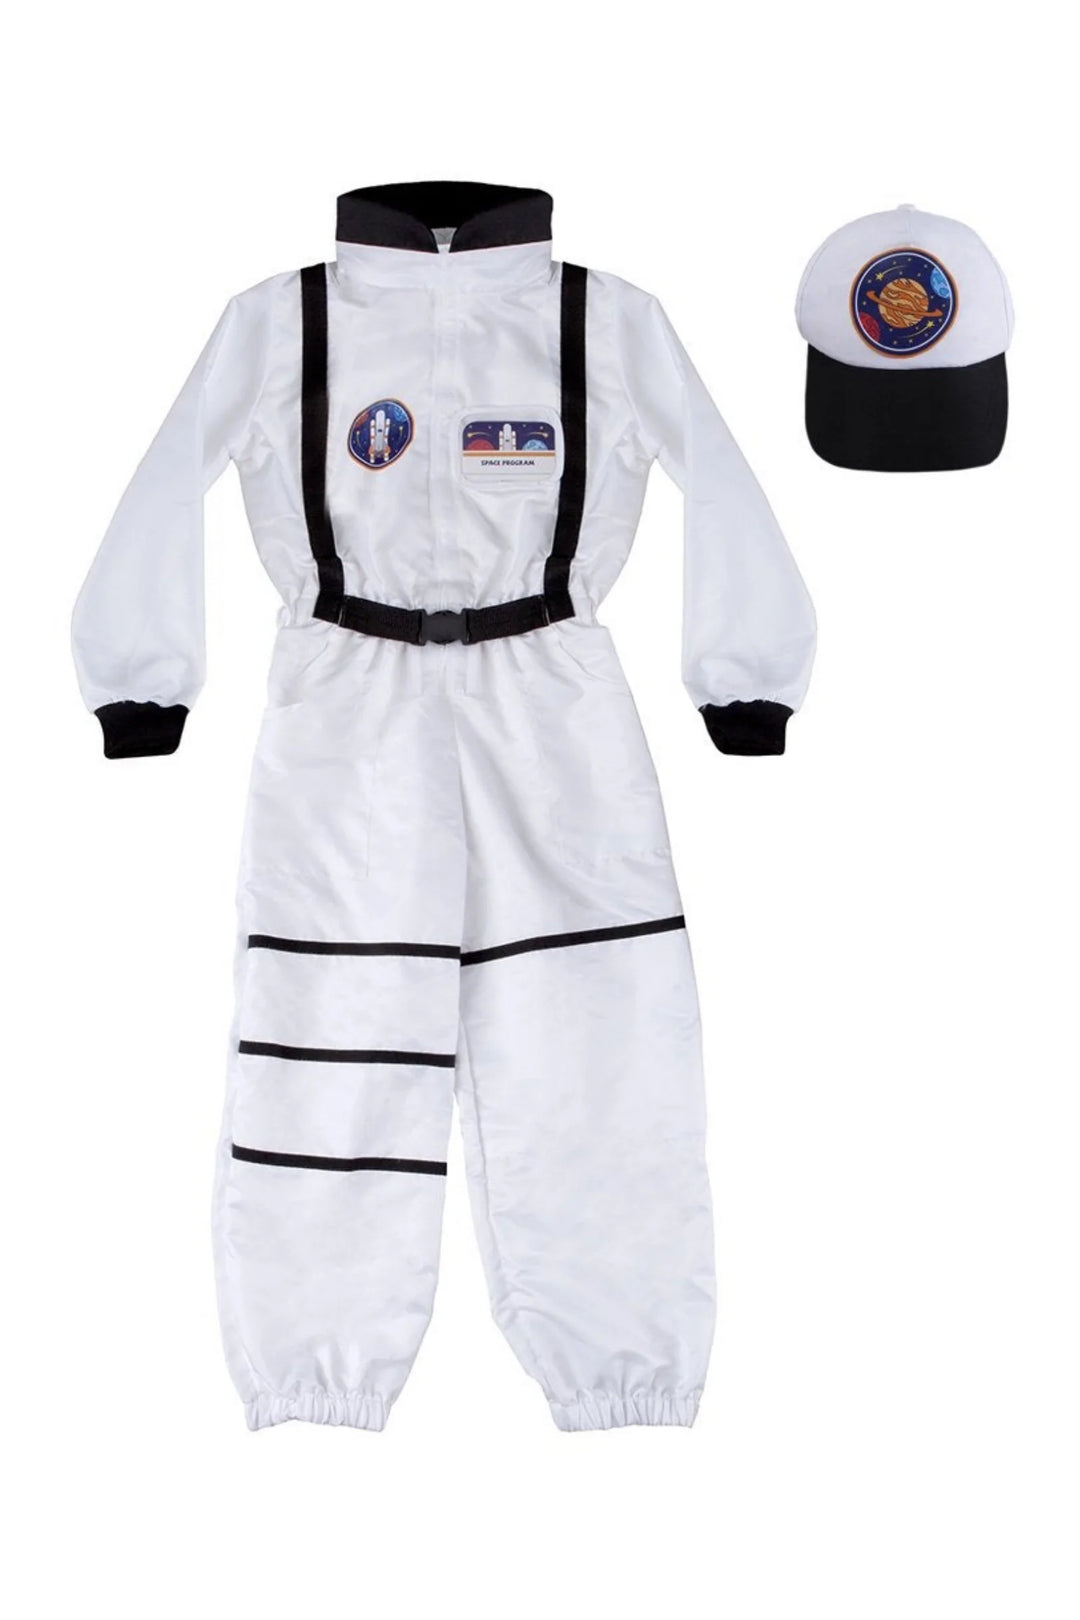 Astronaut Set with Jumpsuit, Hat and ID Badge